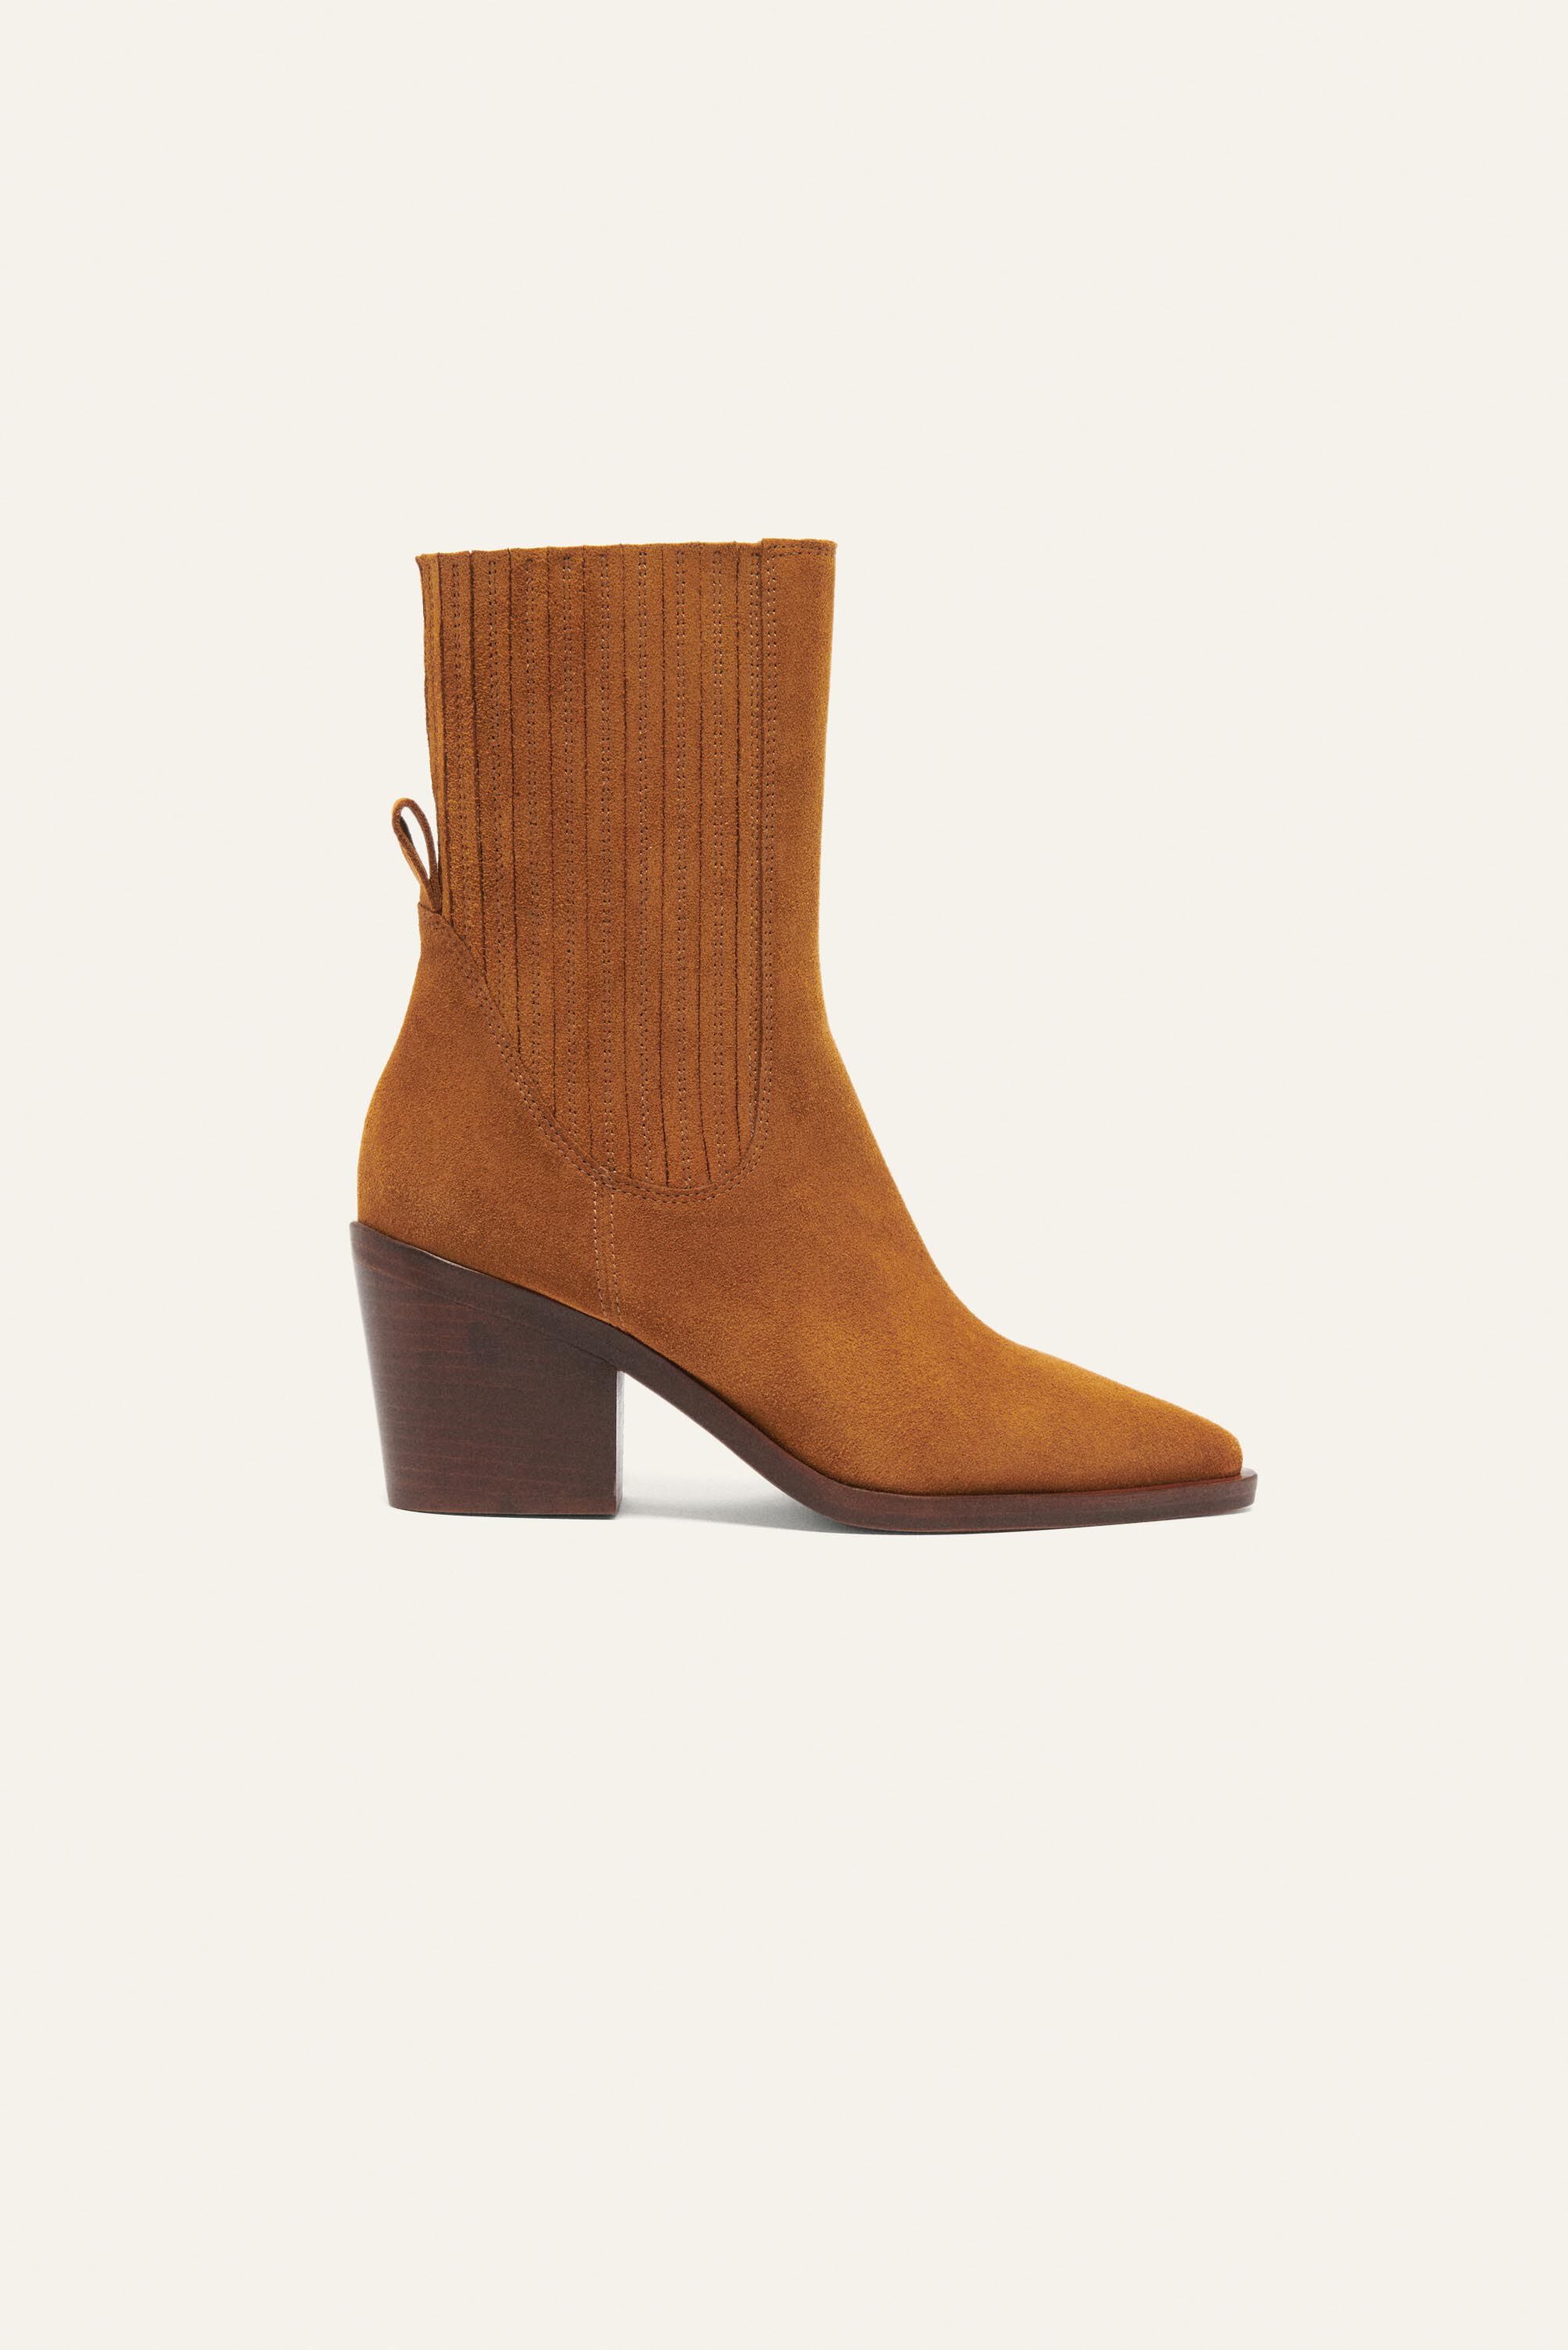 Bueno 0505 Low Chunky Heel Ankle Boots in Brown | rubyshoesday